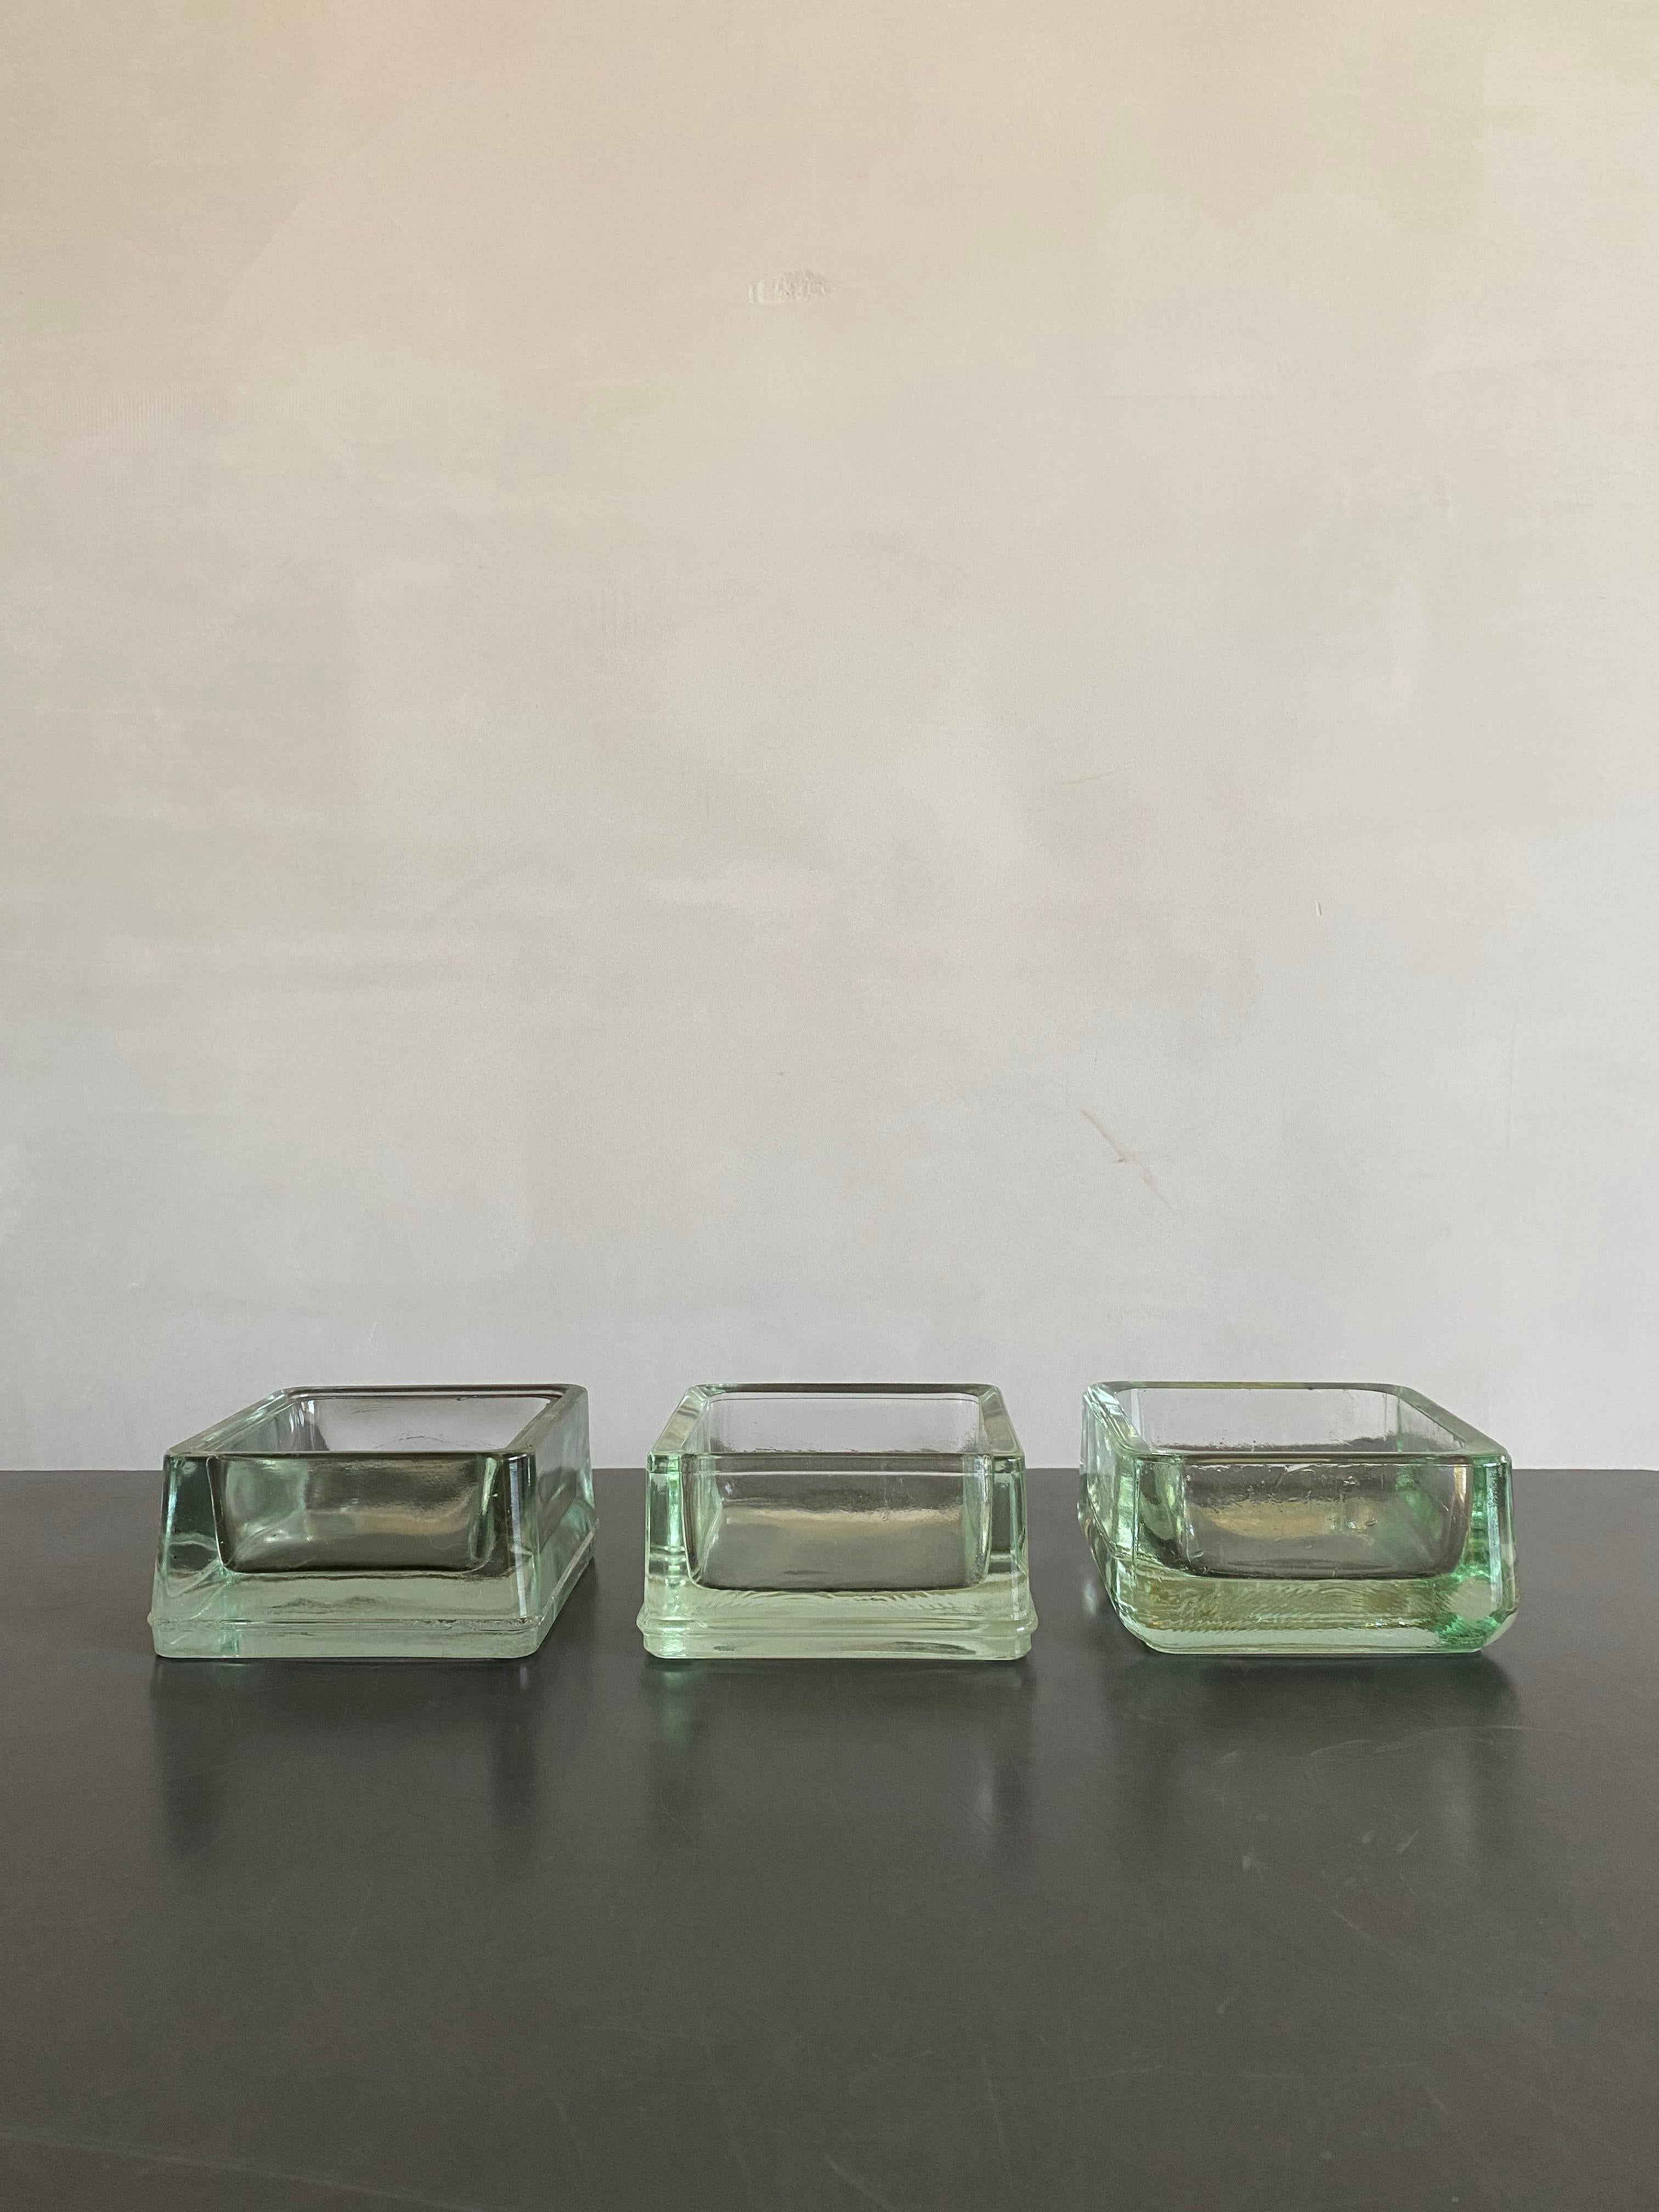 A set of 3 Lumax moulded green glass bowls designed by Le Corbusier.